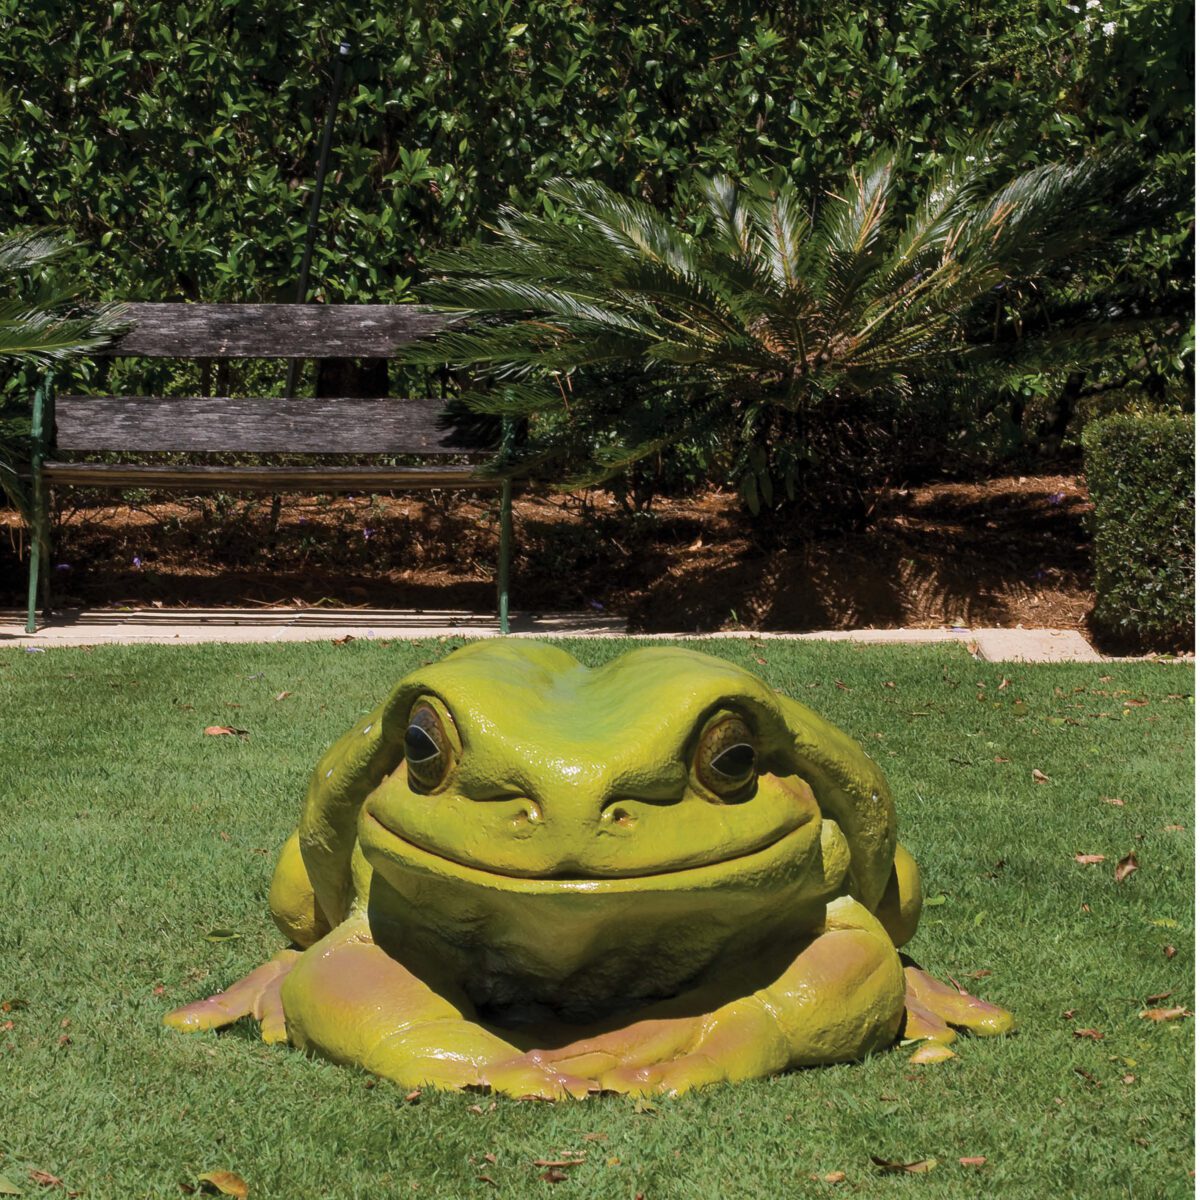 Freddie the Frog with Watering Can Sculpture - Pond and Garden Depot